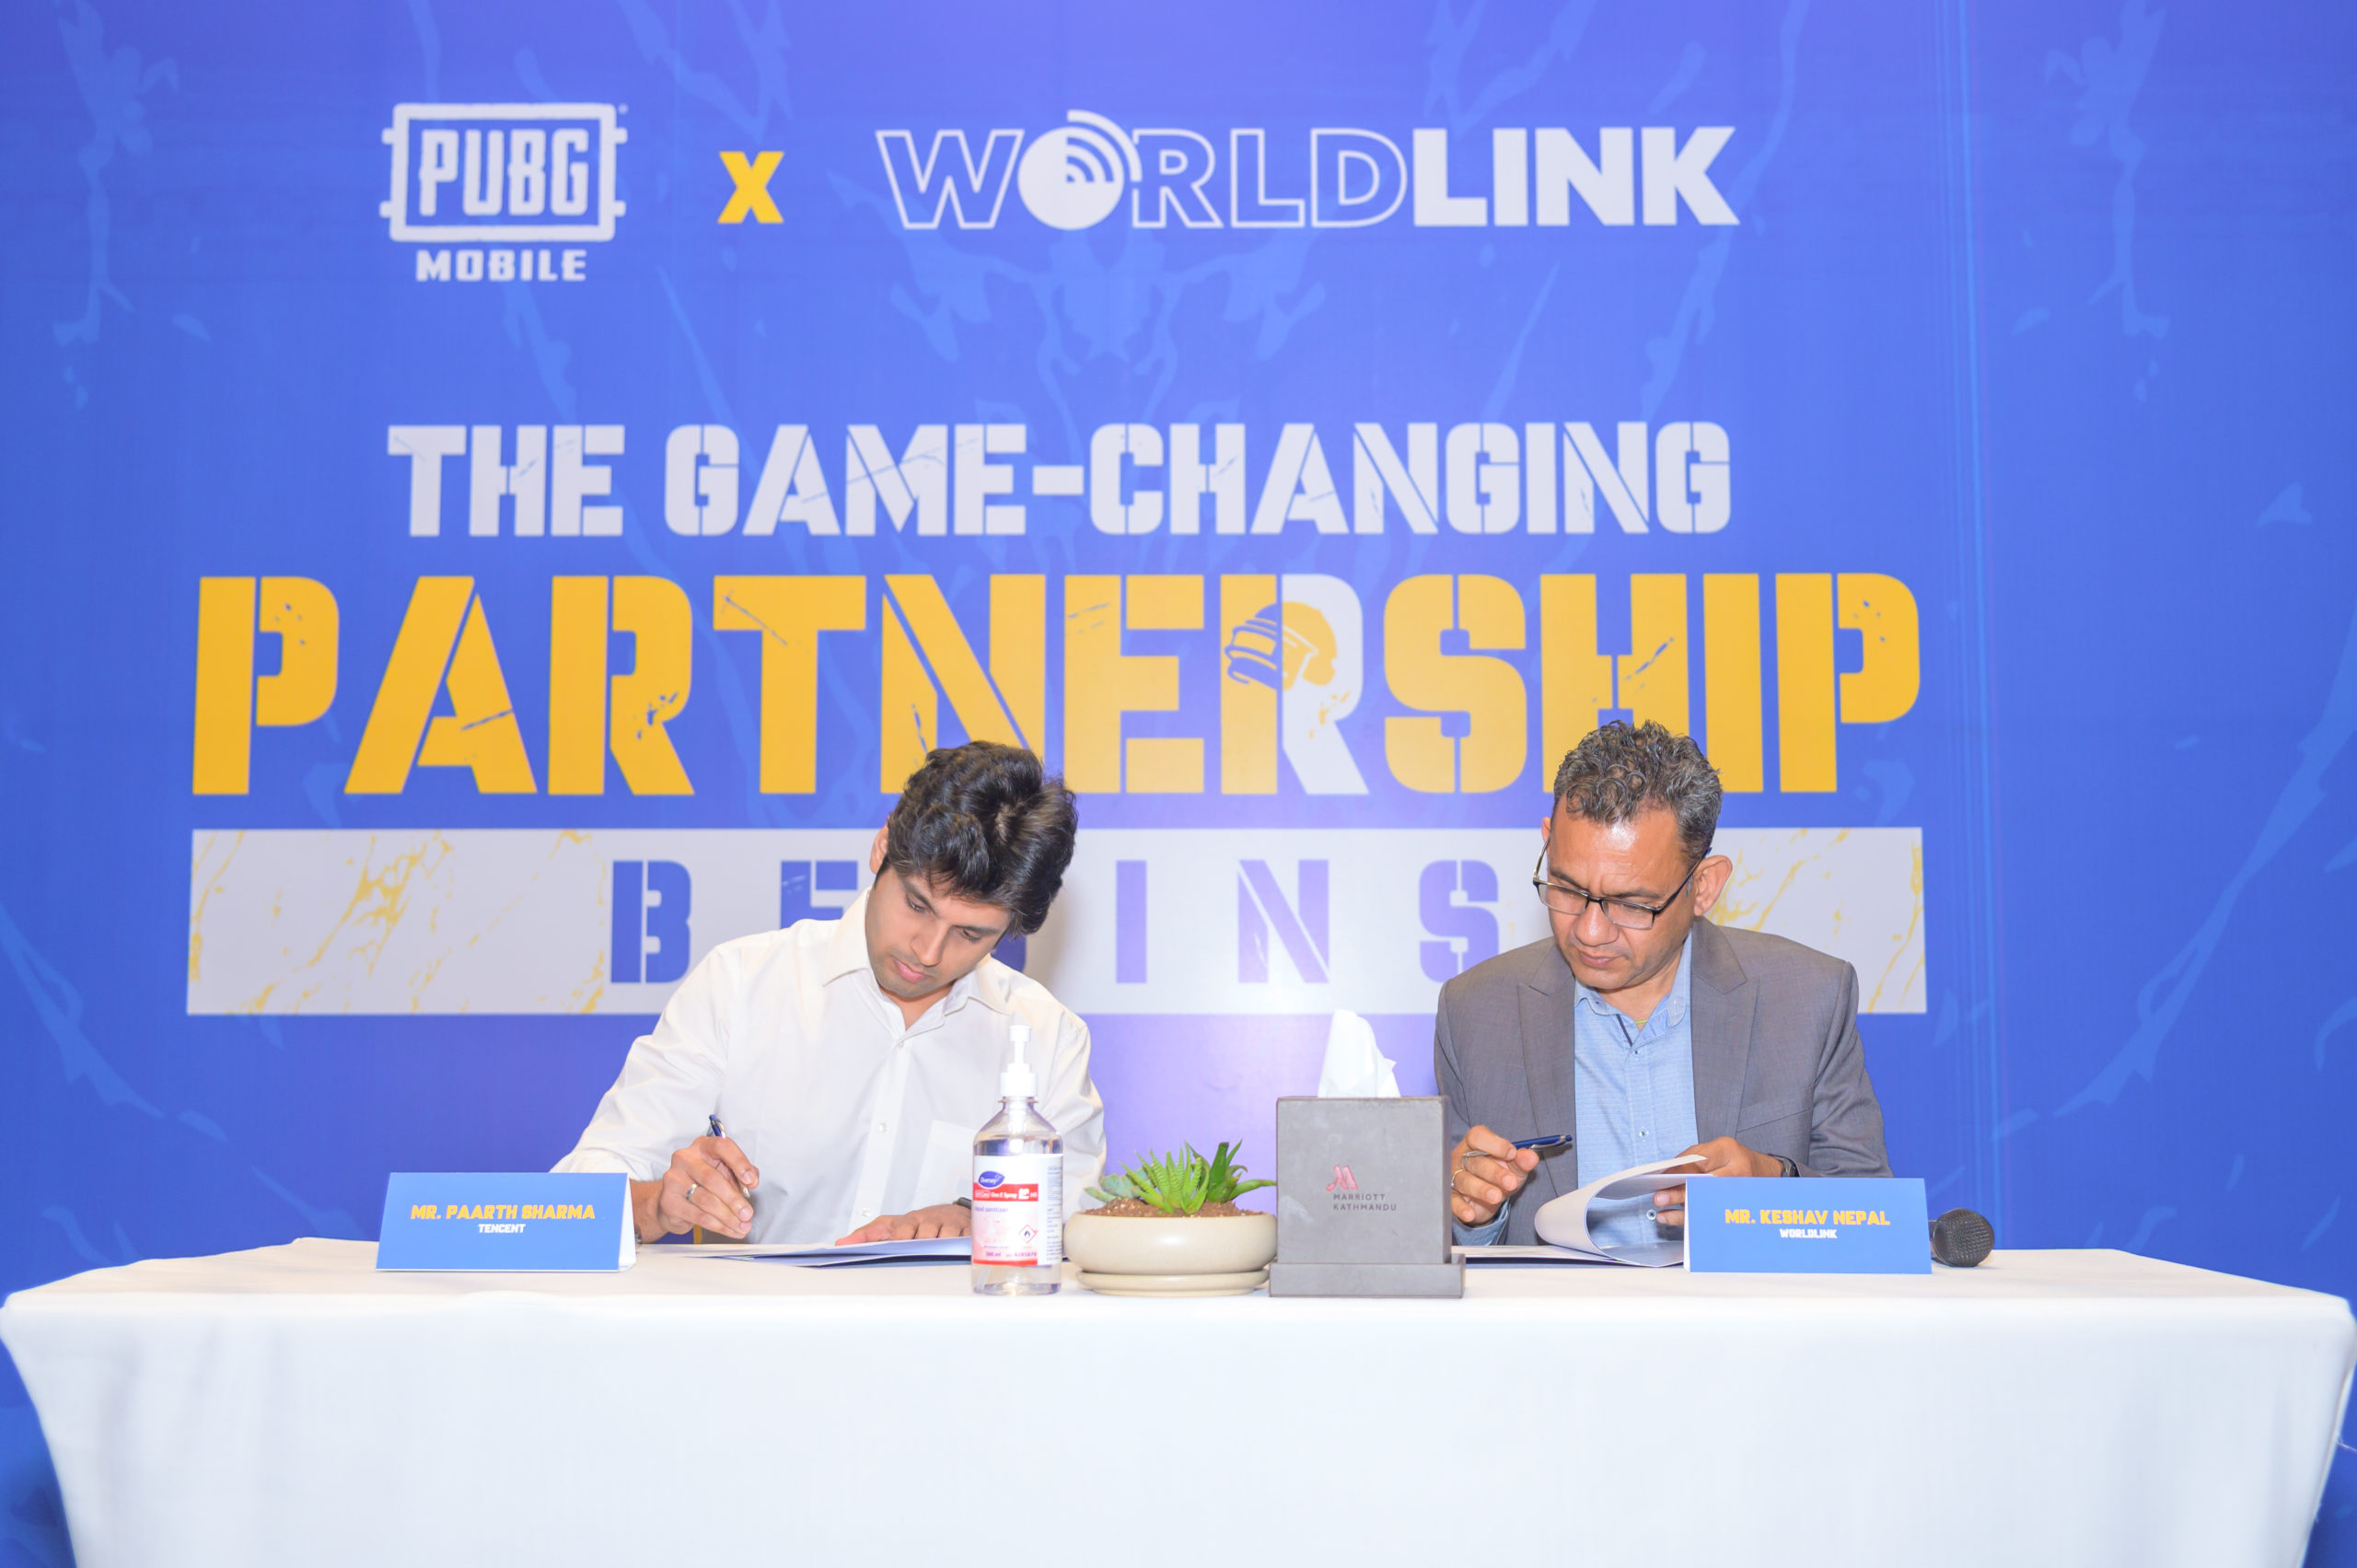 WorldLink Collaborates With PUBG Mobile To Enhnace Gaming Experience